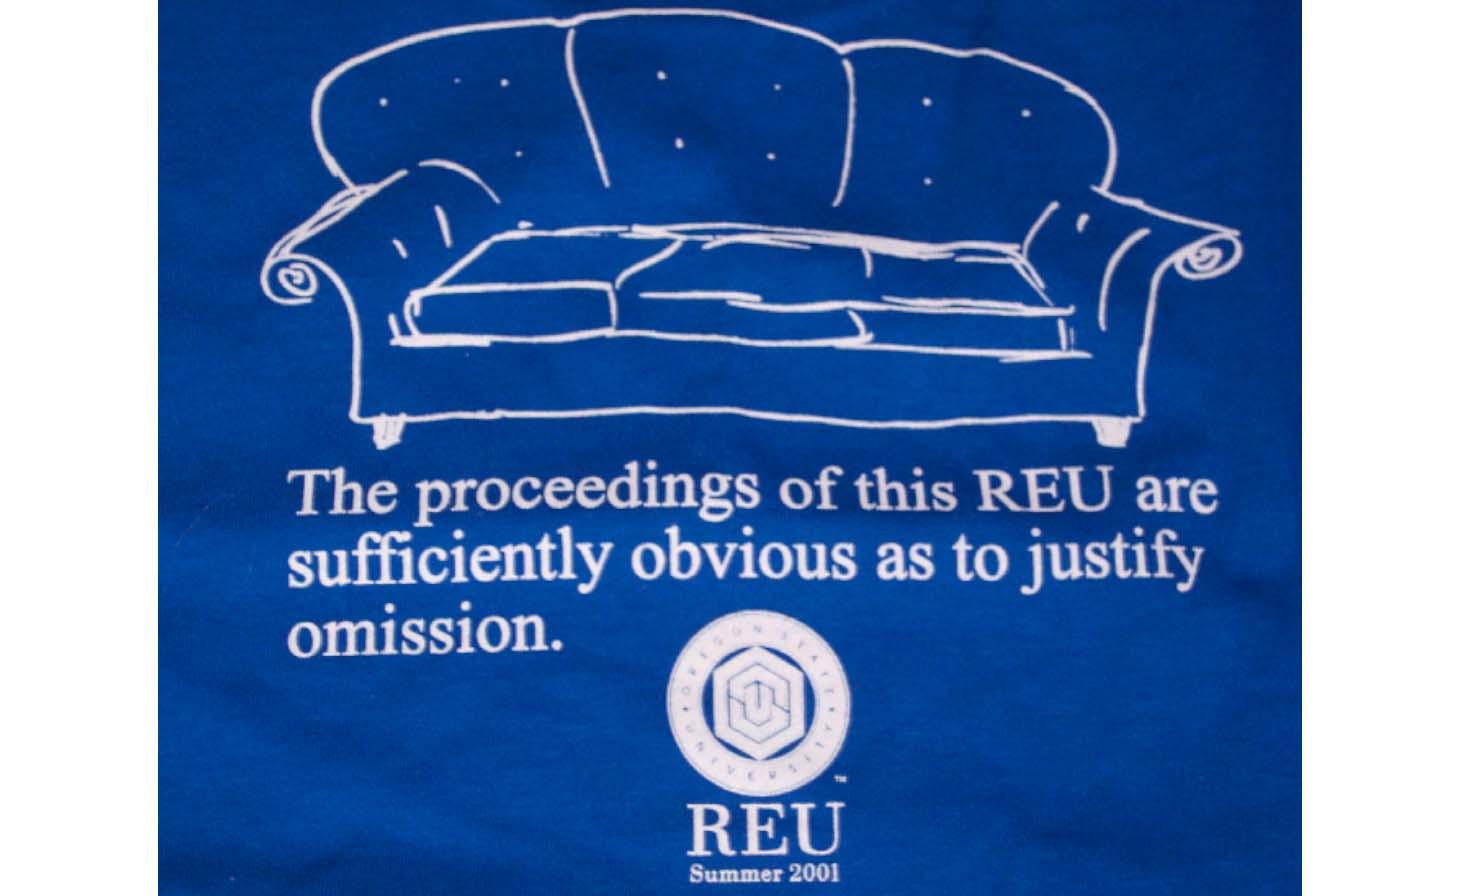 The back image of the OSU REU t shirt in 2001.